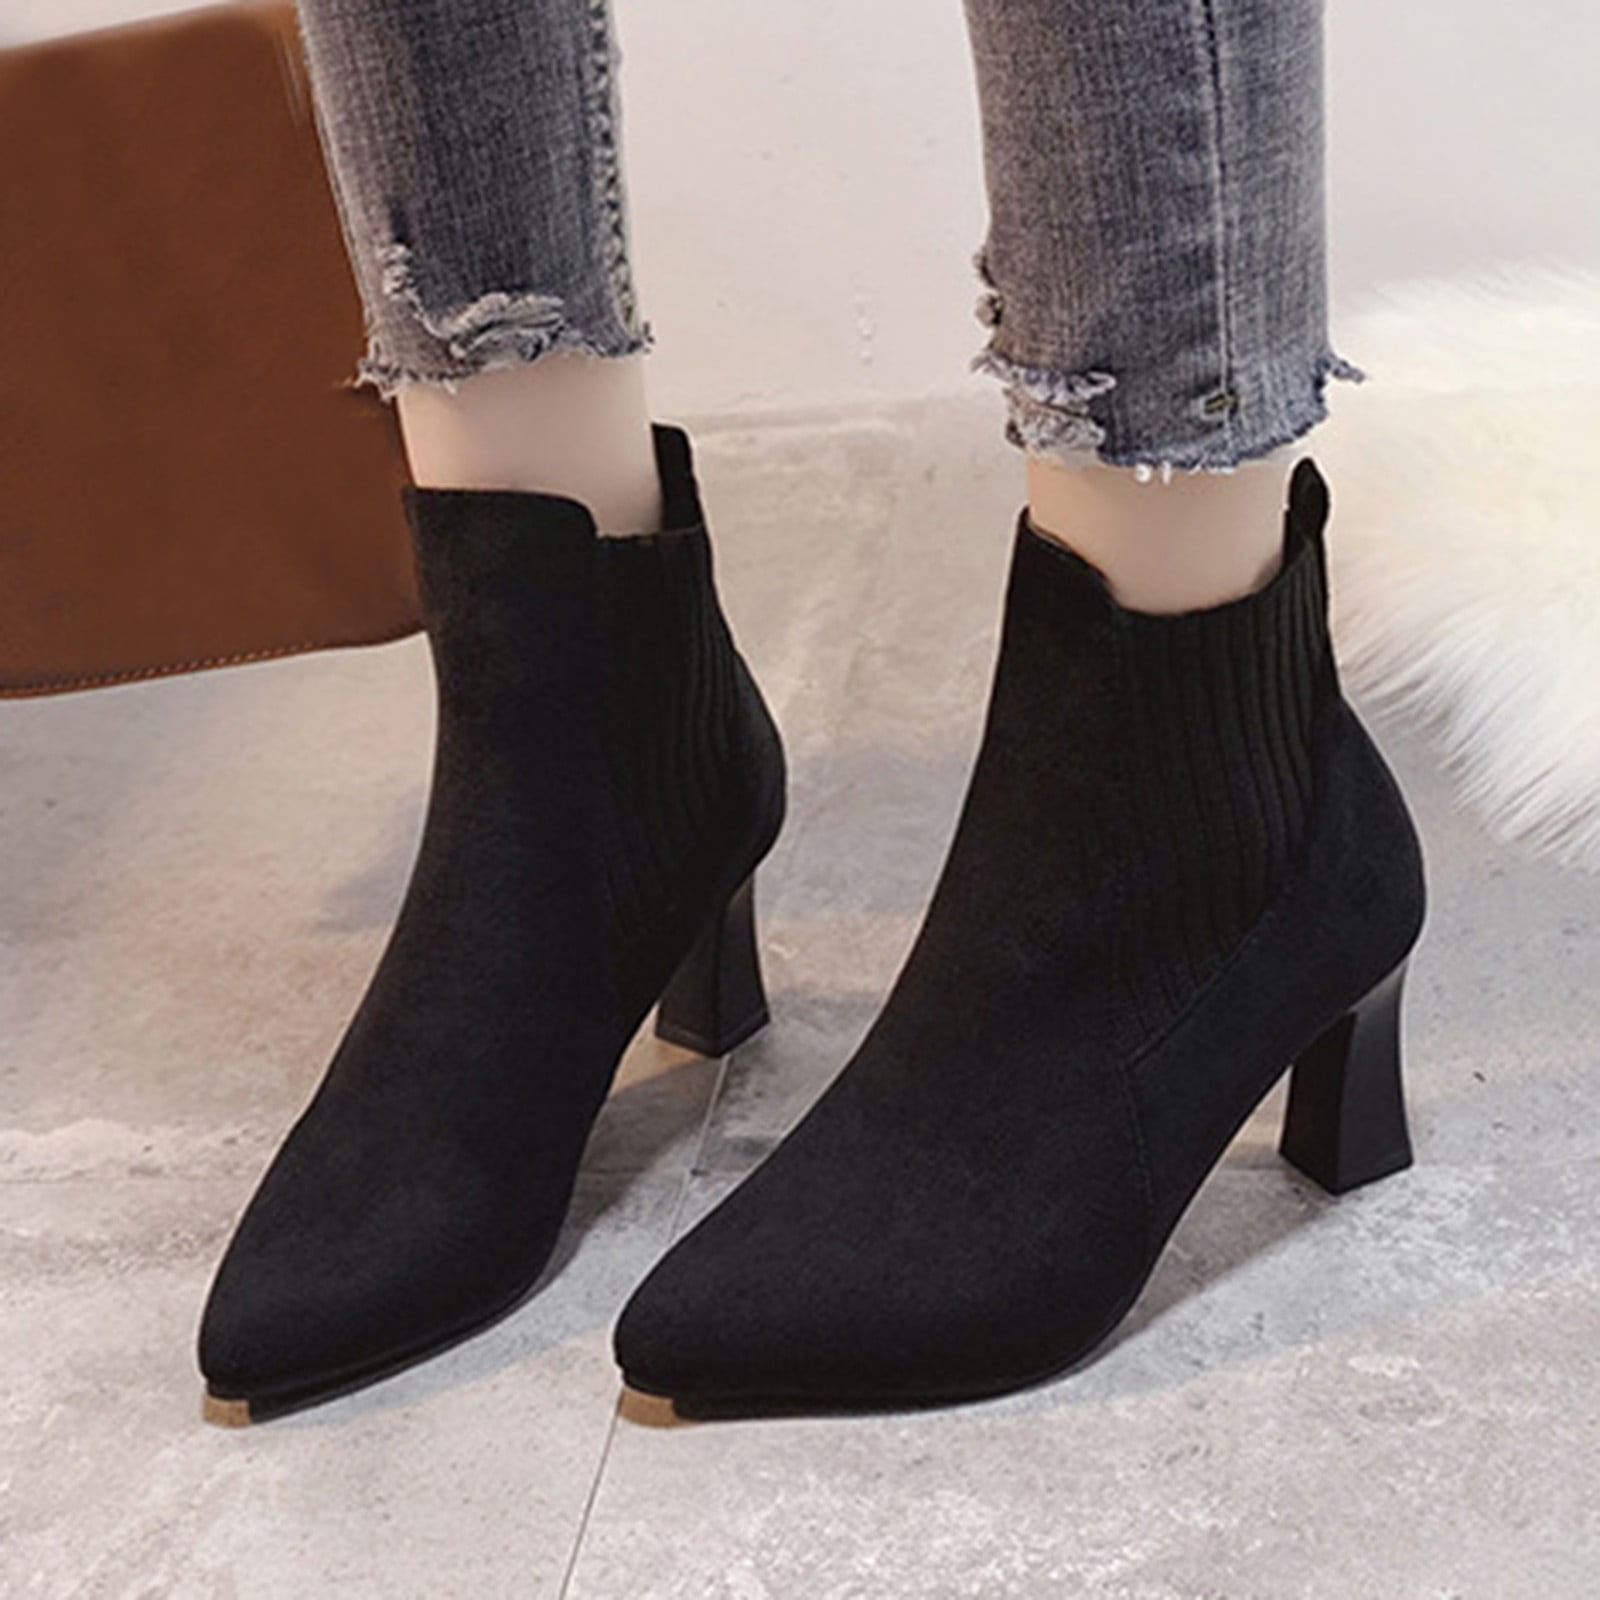 Brand New Elegant Black White Women Ankle Nude Boots Sexy 3 inch Heels  Office Lady Dress Shoes EM91 Plus Big Size 10 43 47